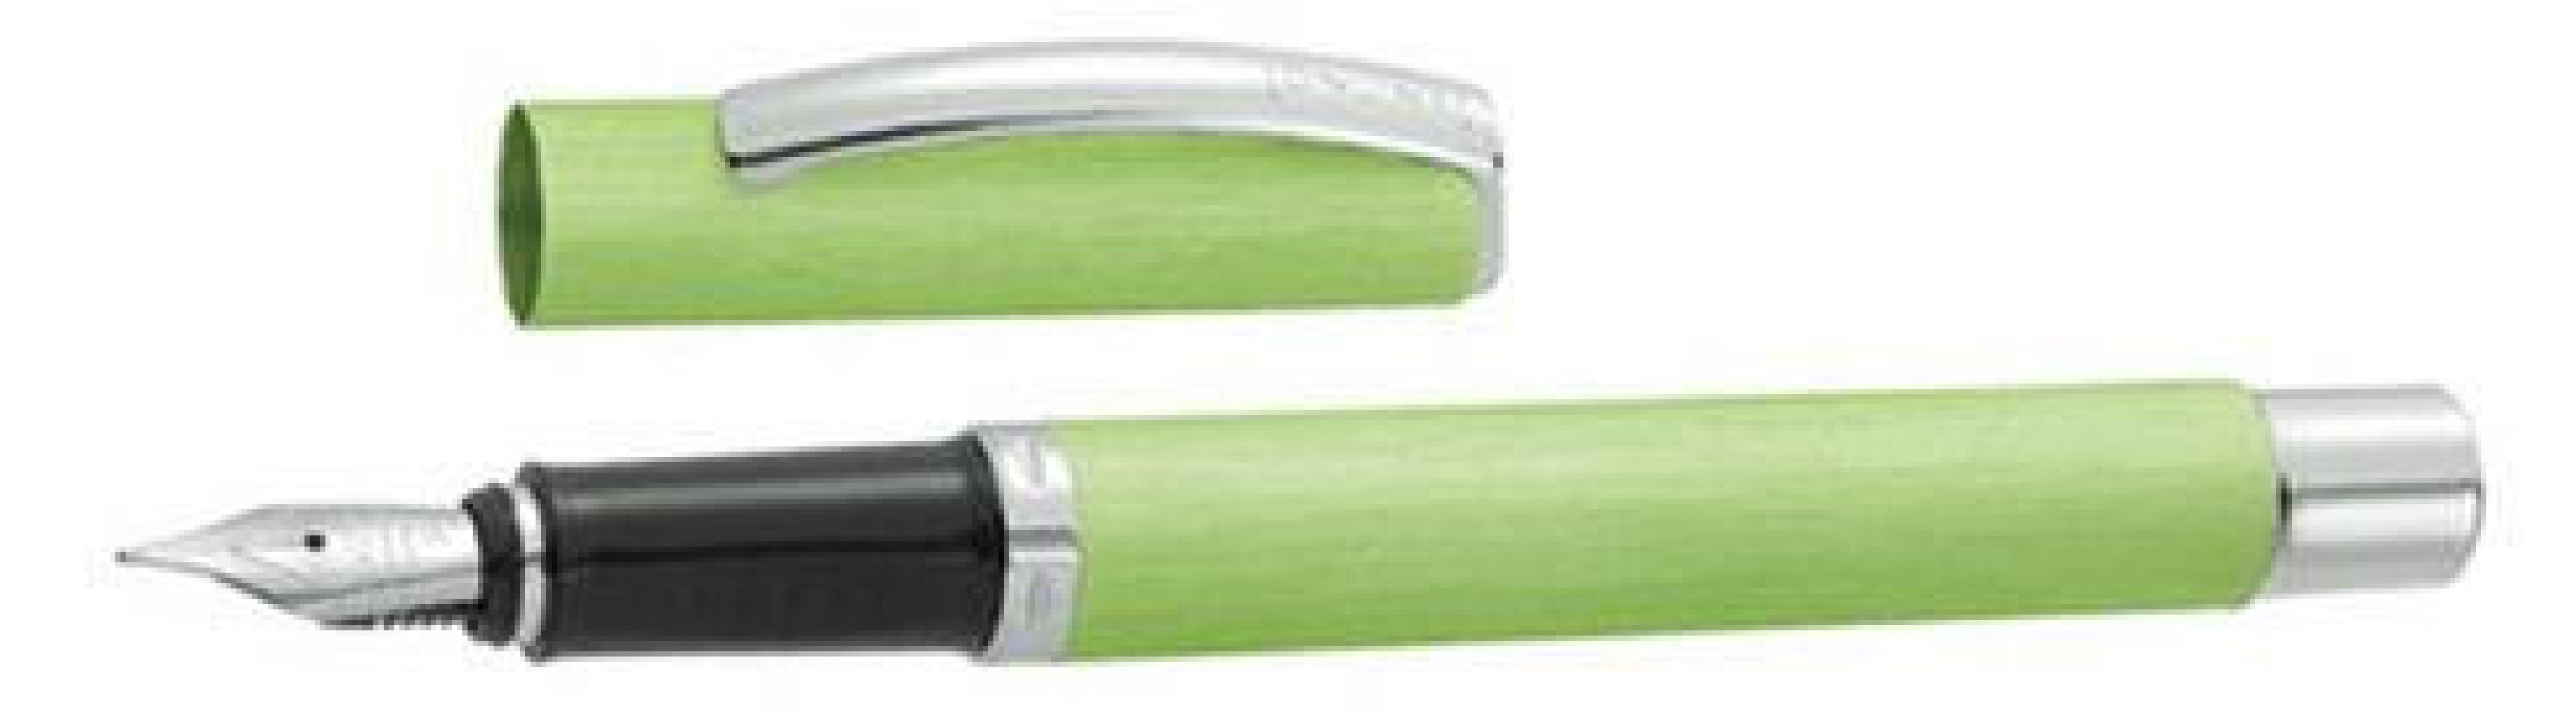 Fountain Pen Vision Juicy Green 36744 ONLINE